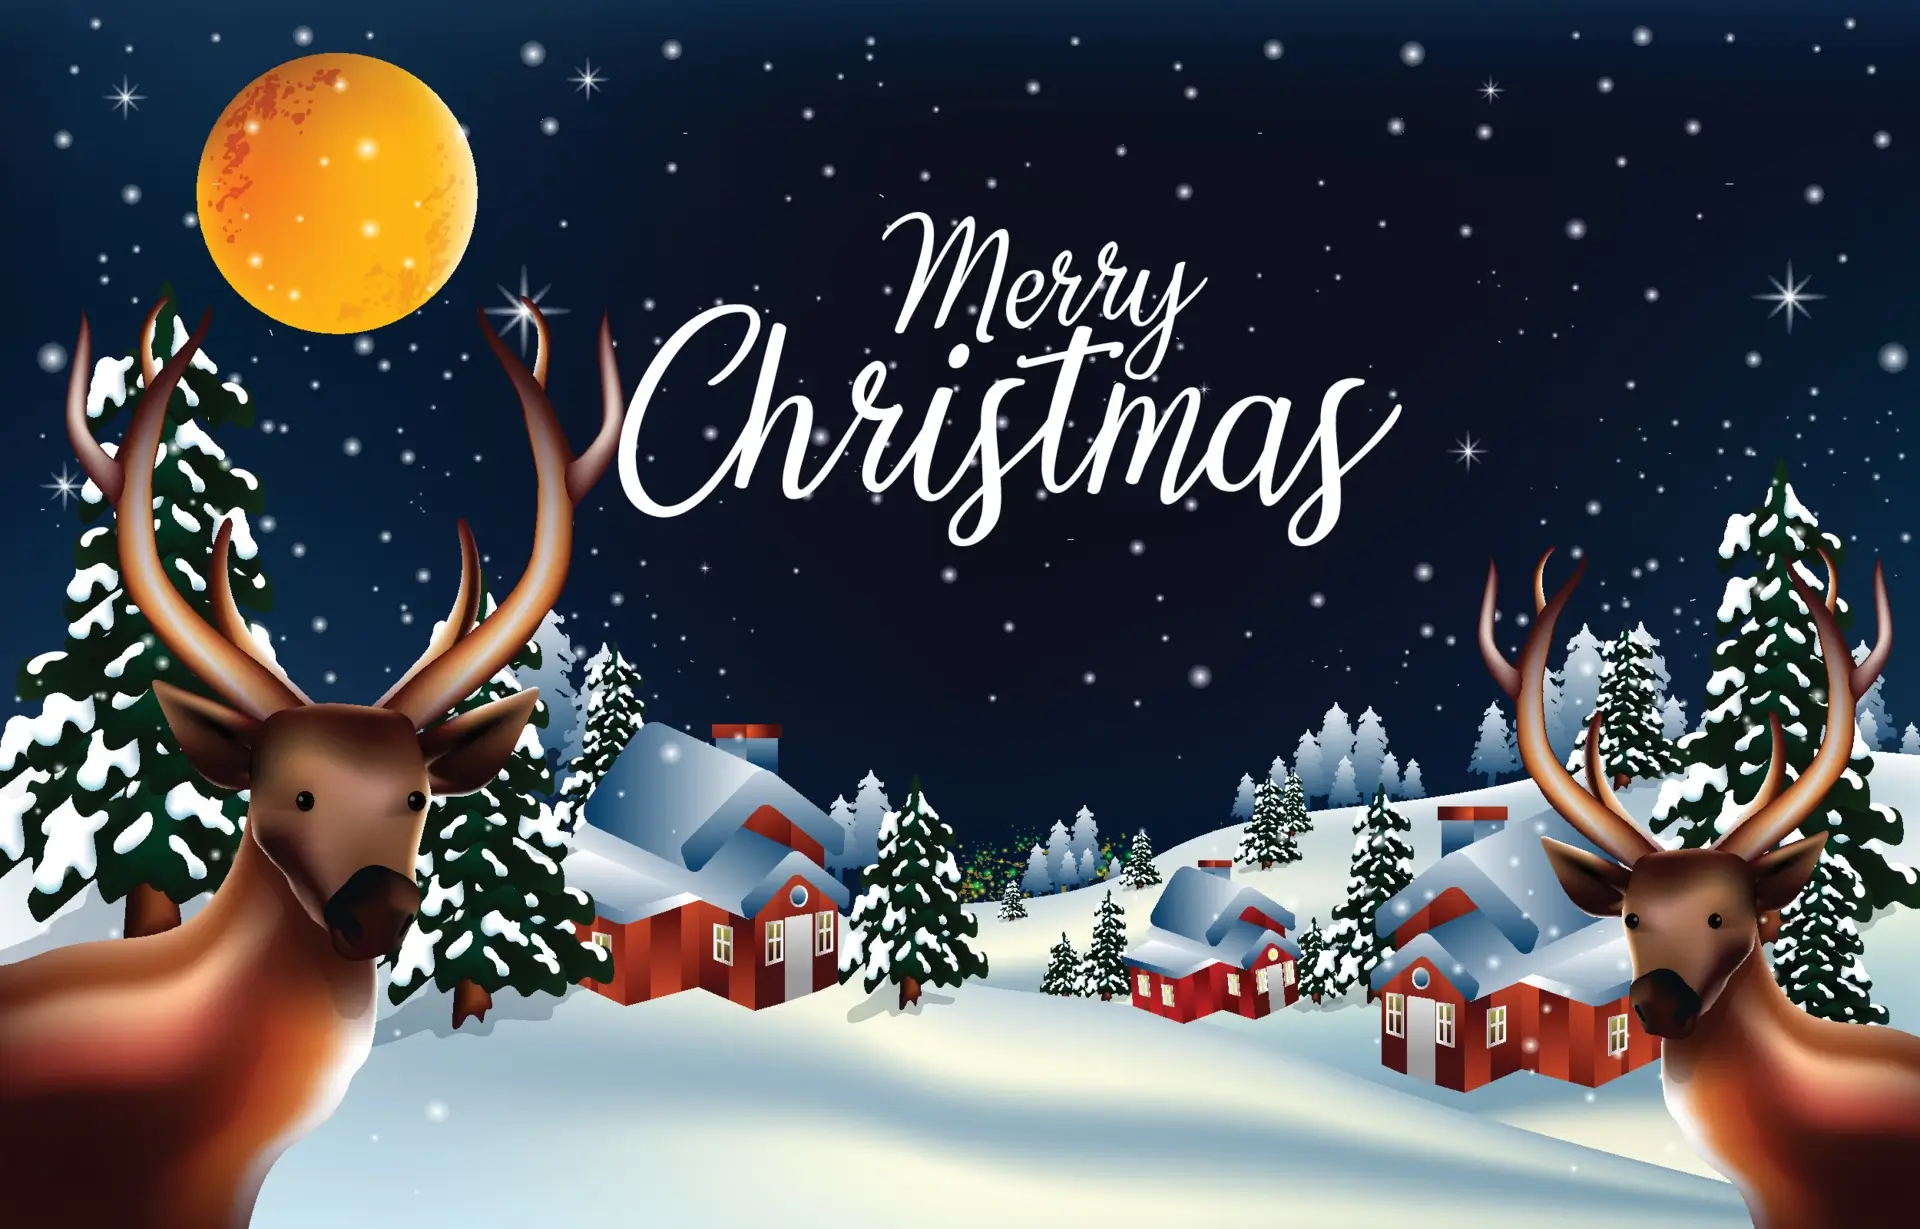 Merry Christmas Images Pictures Free